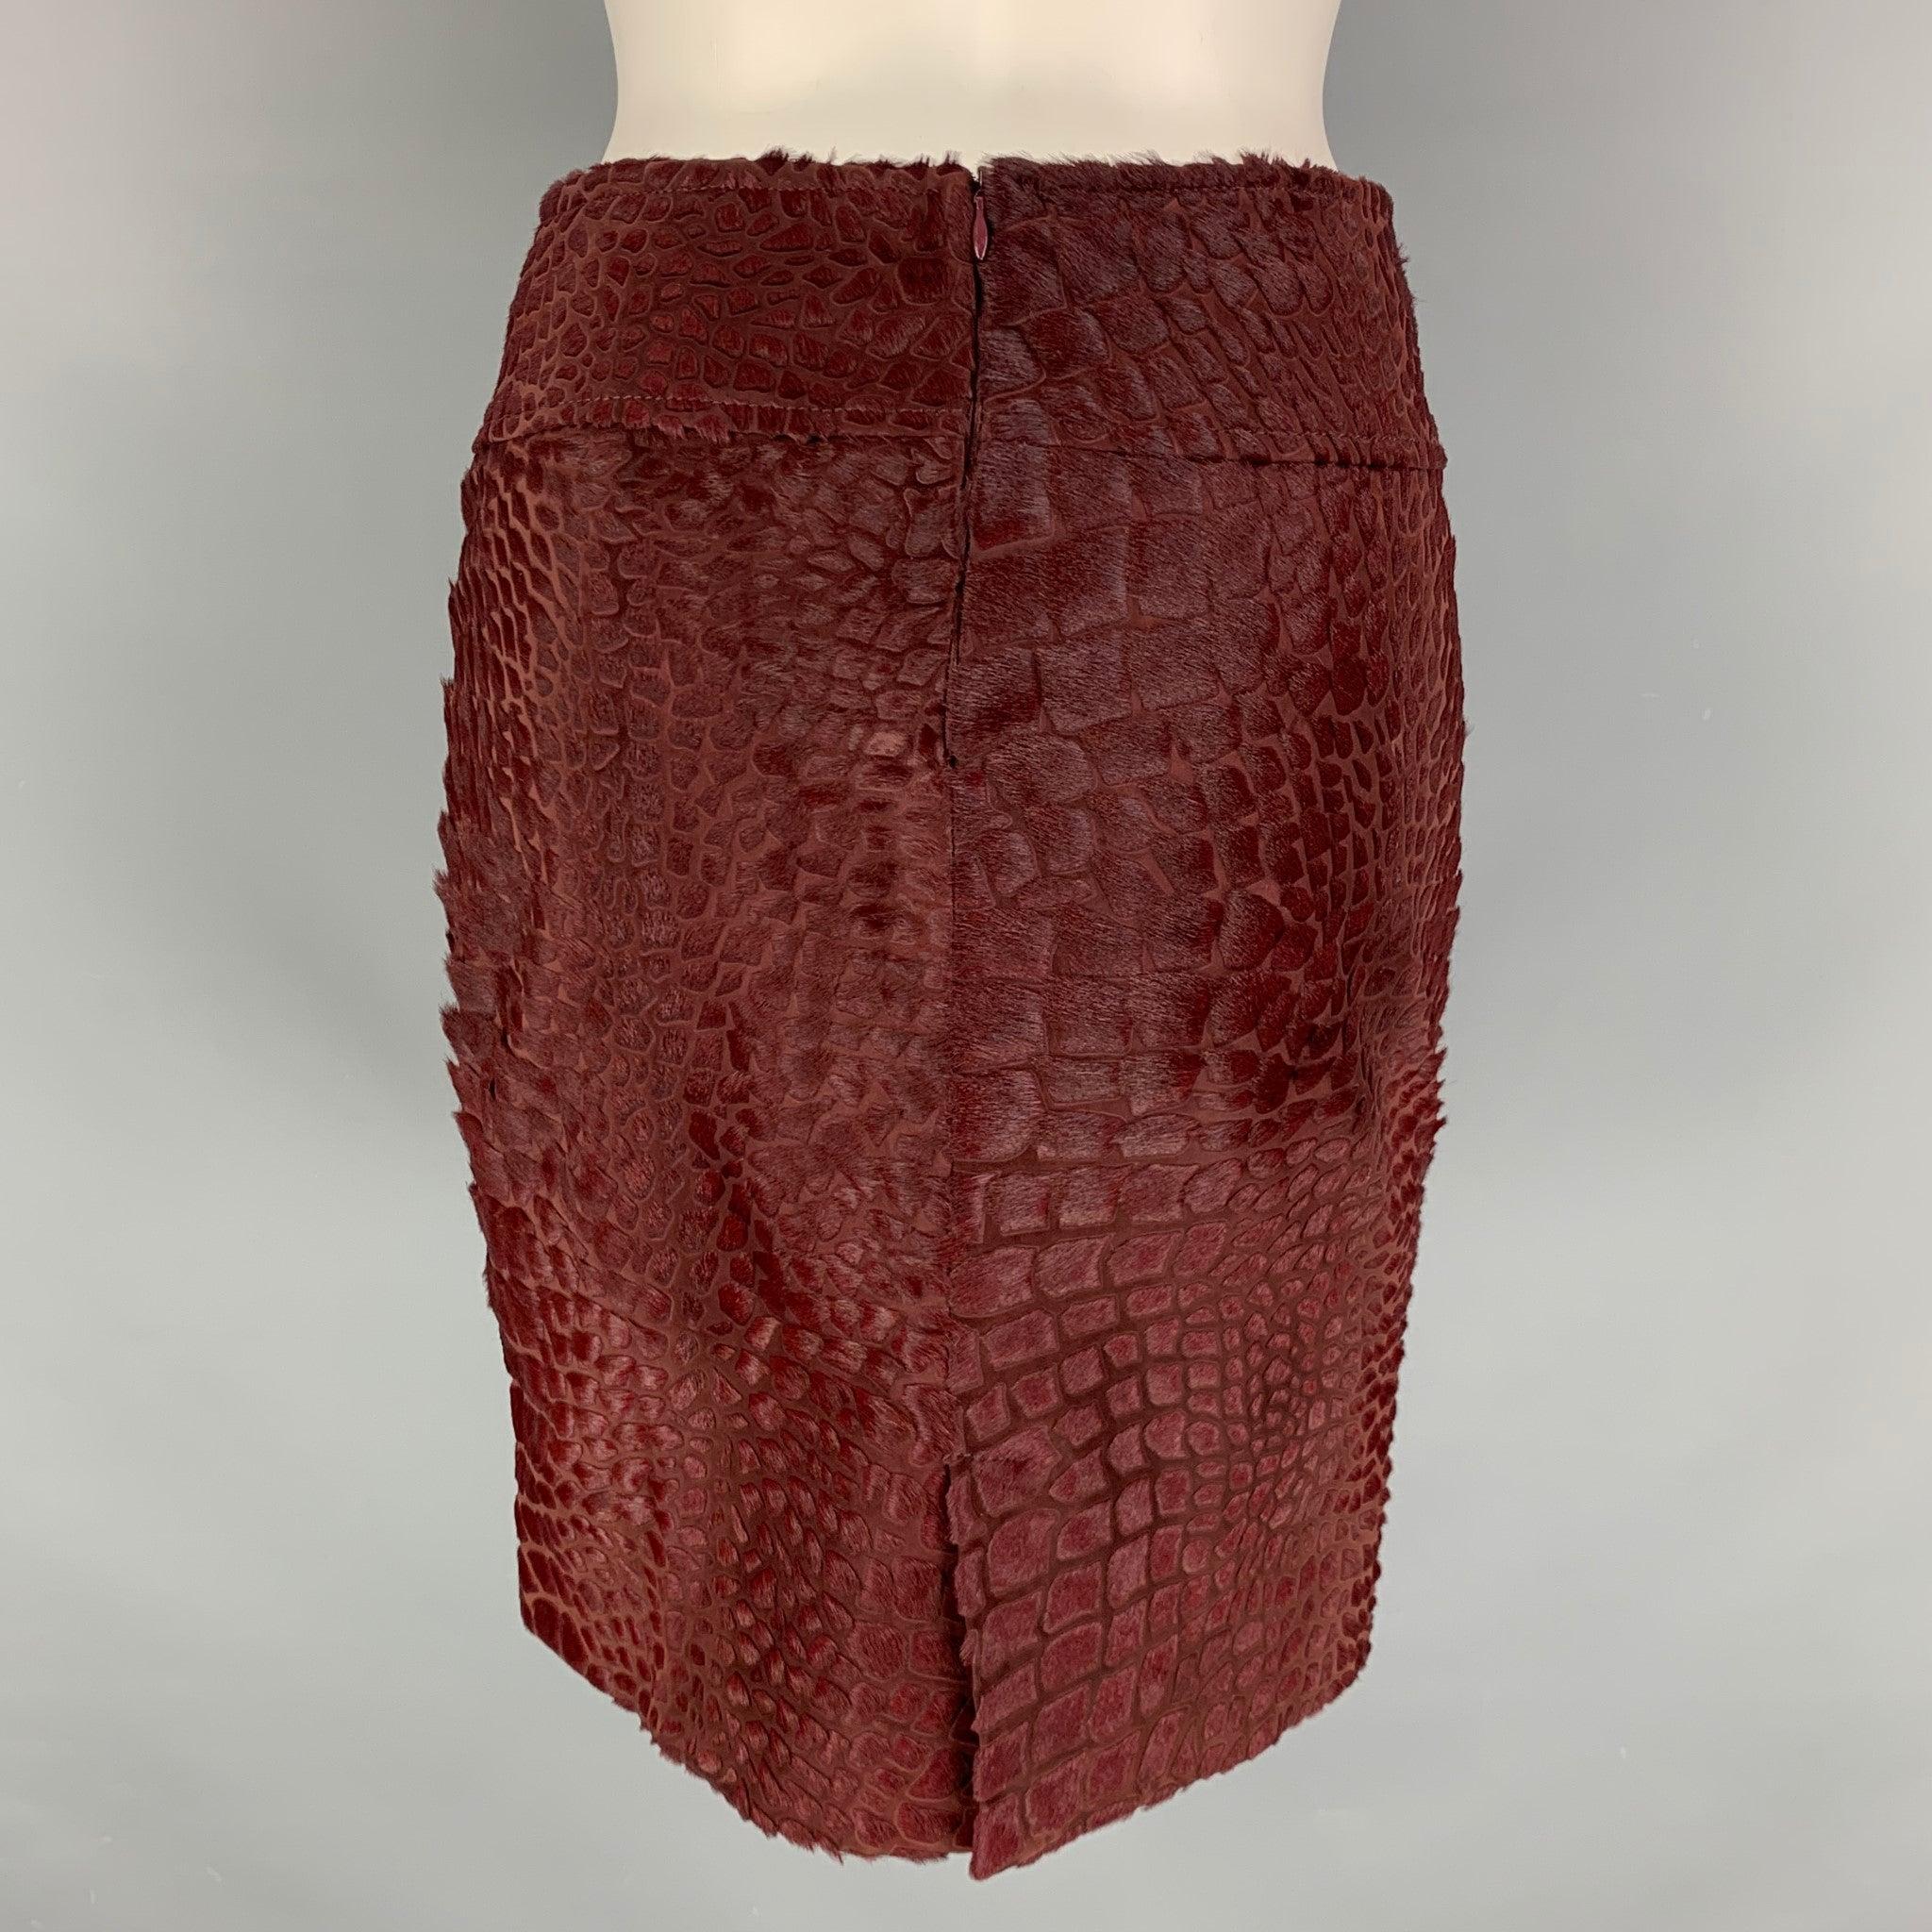 SALVATORE FERRAGAMO skirt comes in a burgundy woven material features a pencil silhouette, knee length, and zip up closure at center back. Made in Italy.Excellent Pre-Owned Condition. 

Marked:   38 

Measurements: 
  Waist: 27 inches Hip: 36 inches